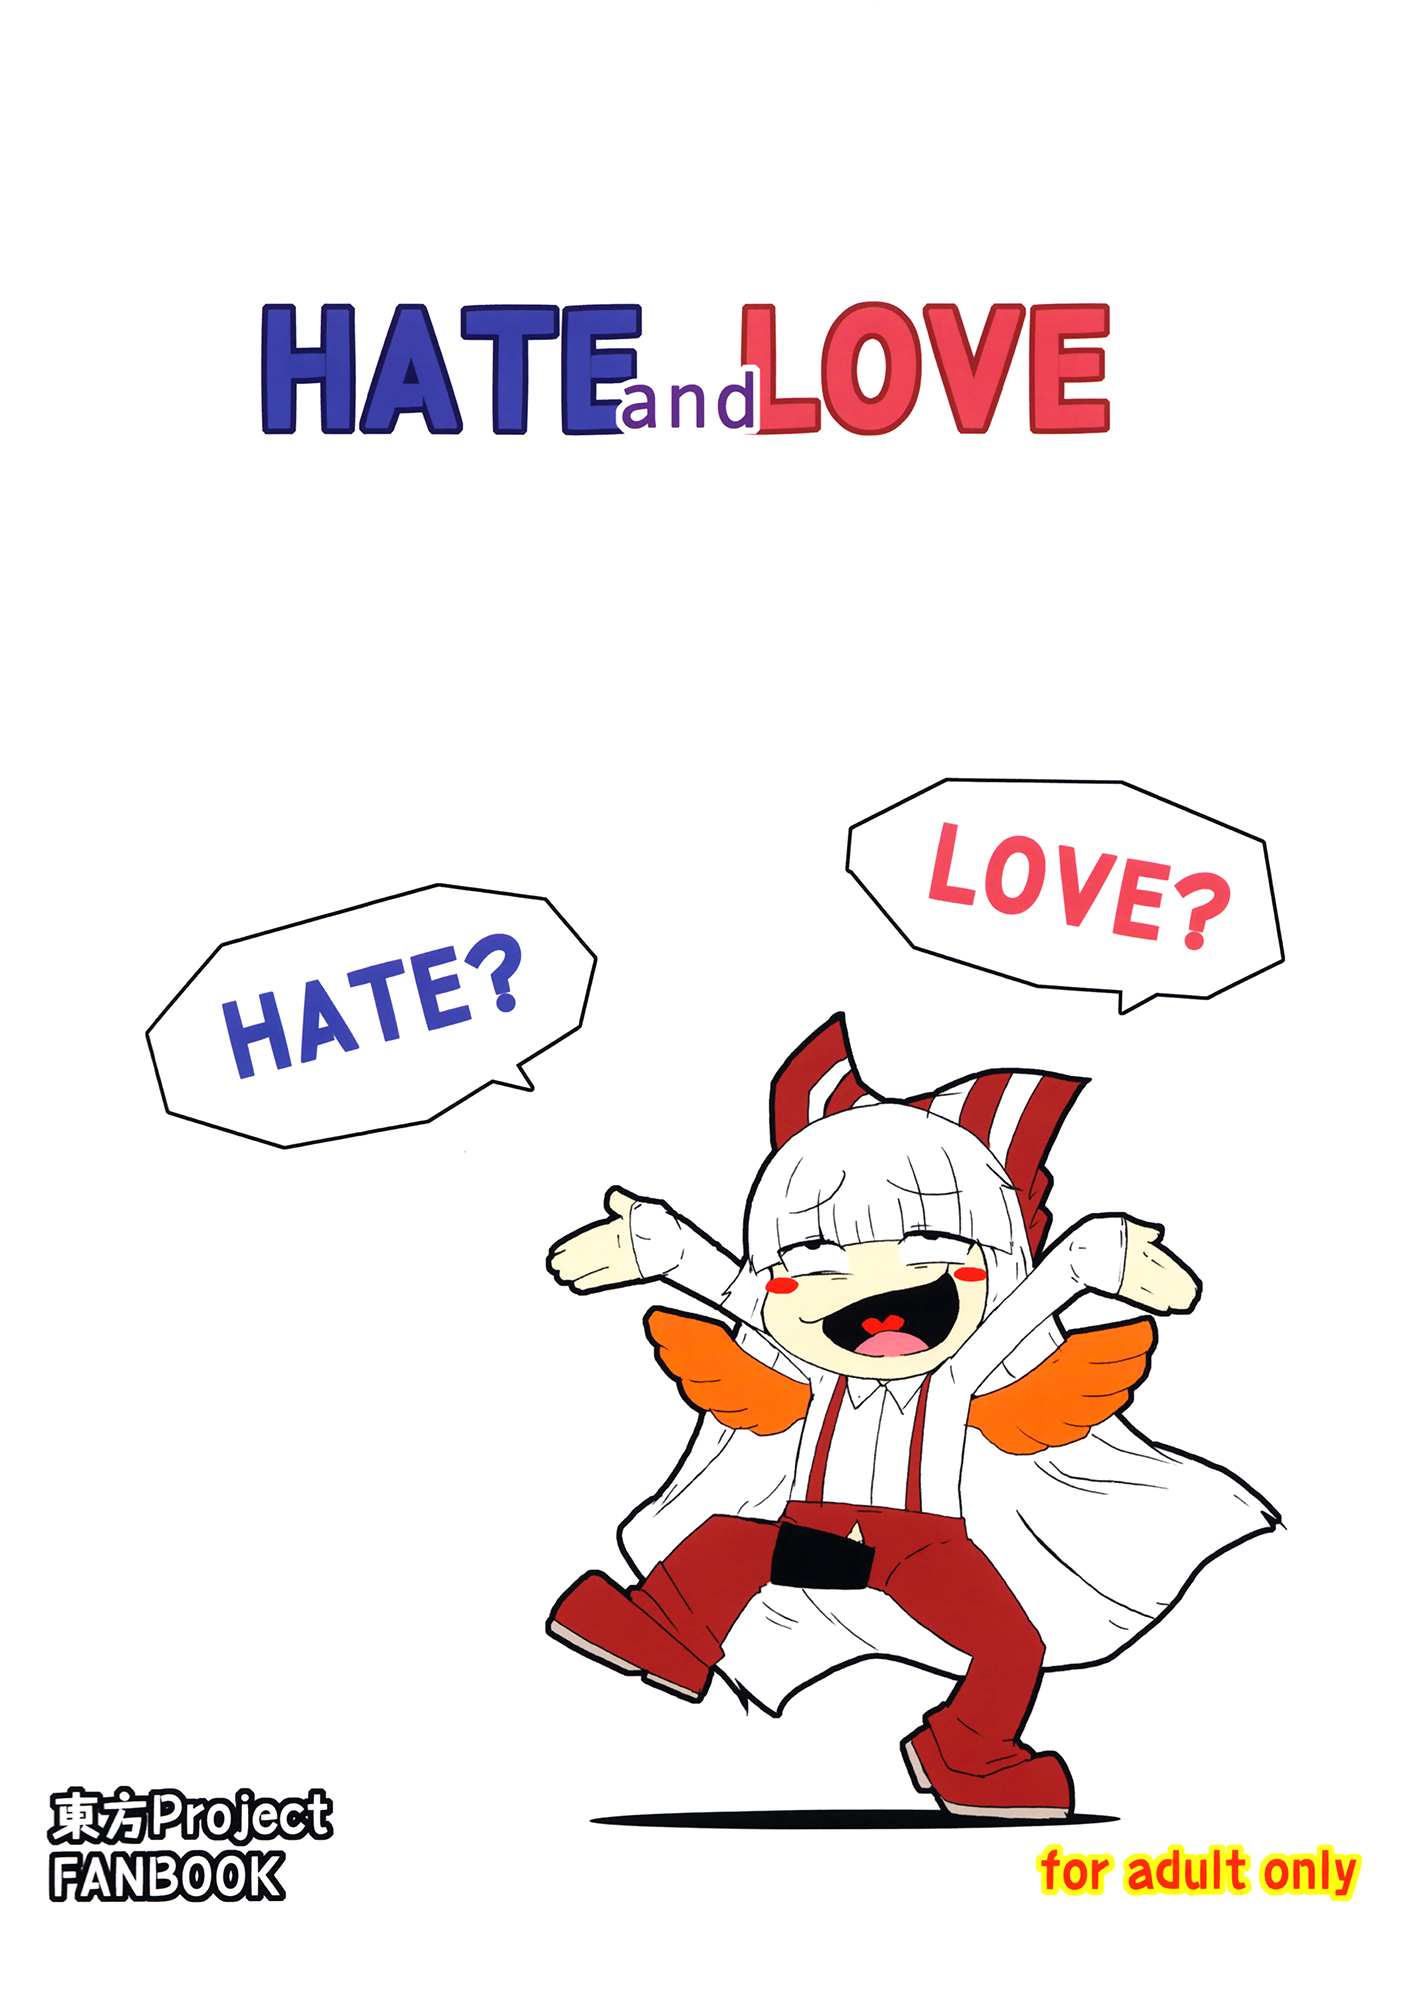 HATE and LOVE 999